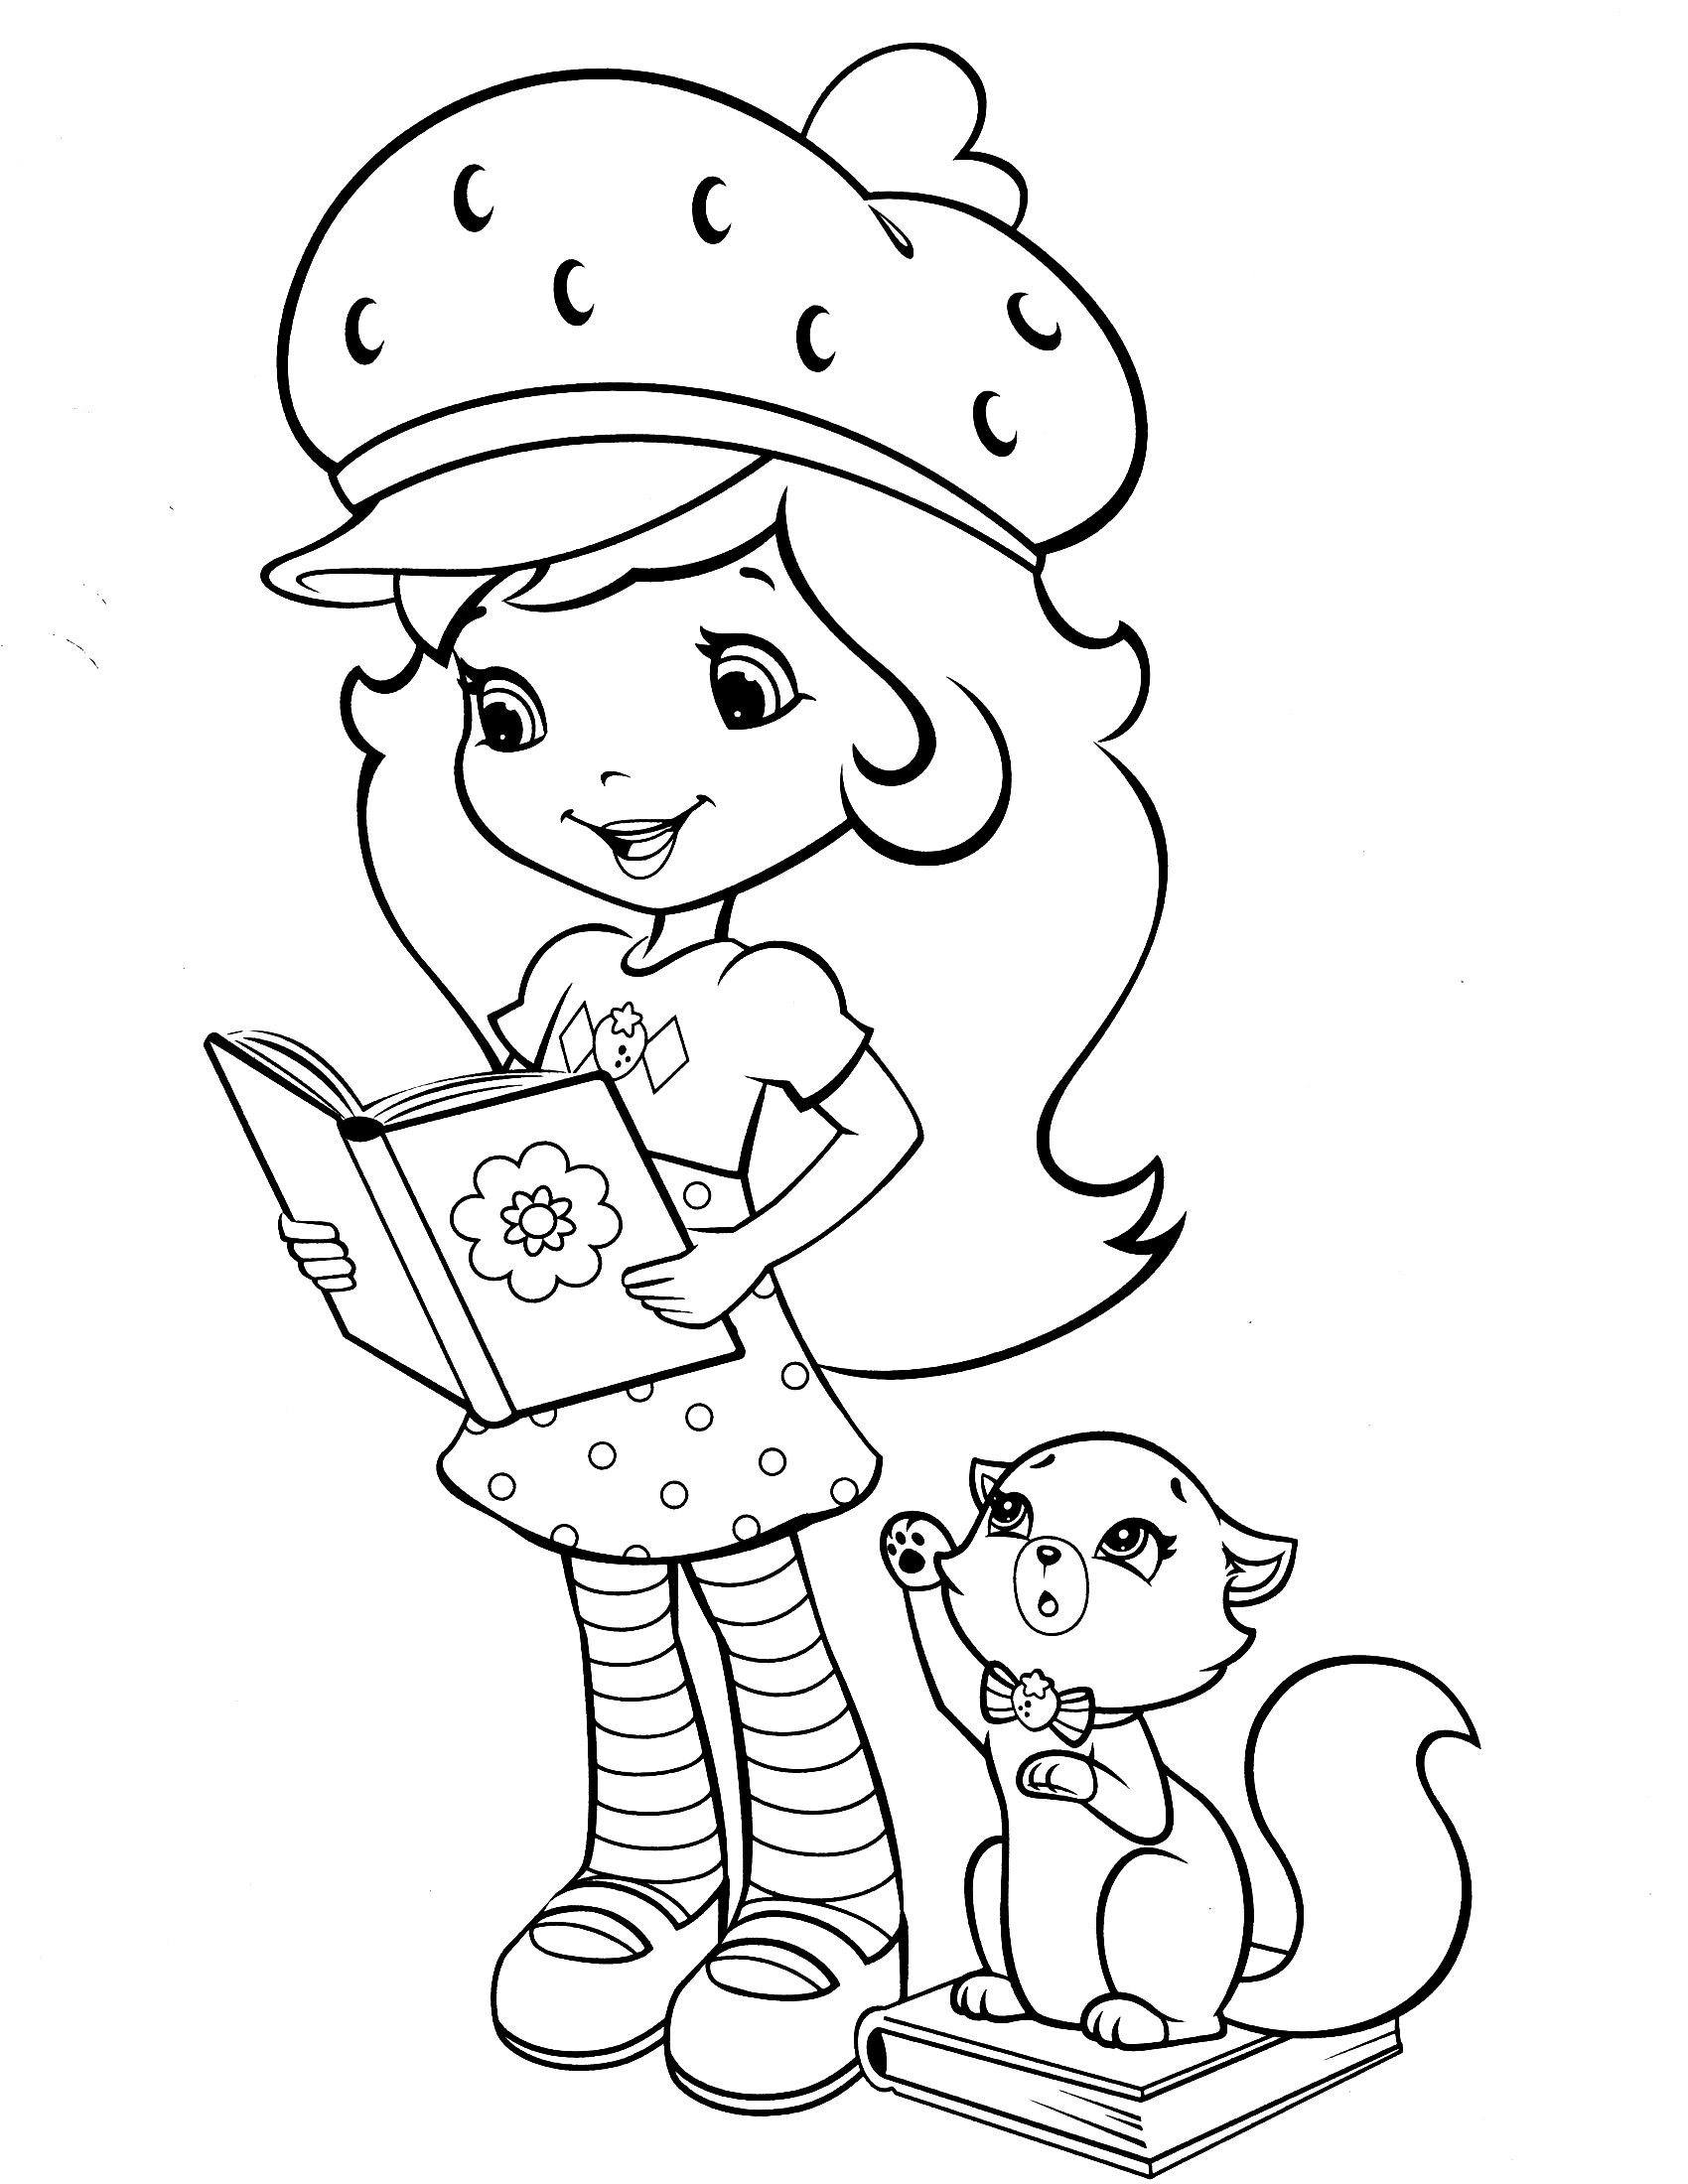 Printable Strawberry Shortcake Coloring Pages Pdf - Strawberry Shortcake Birthday Coloring Pages